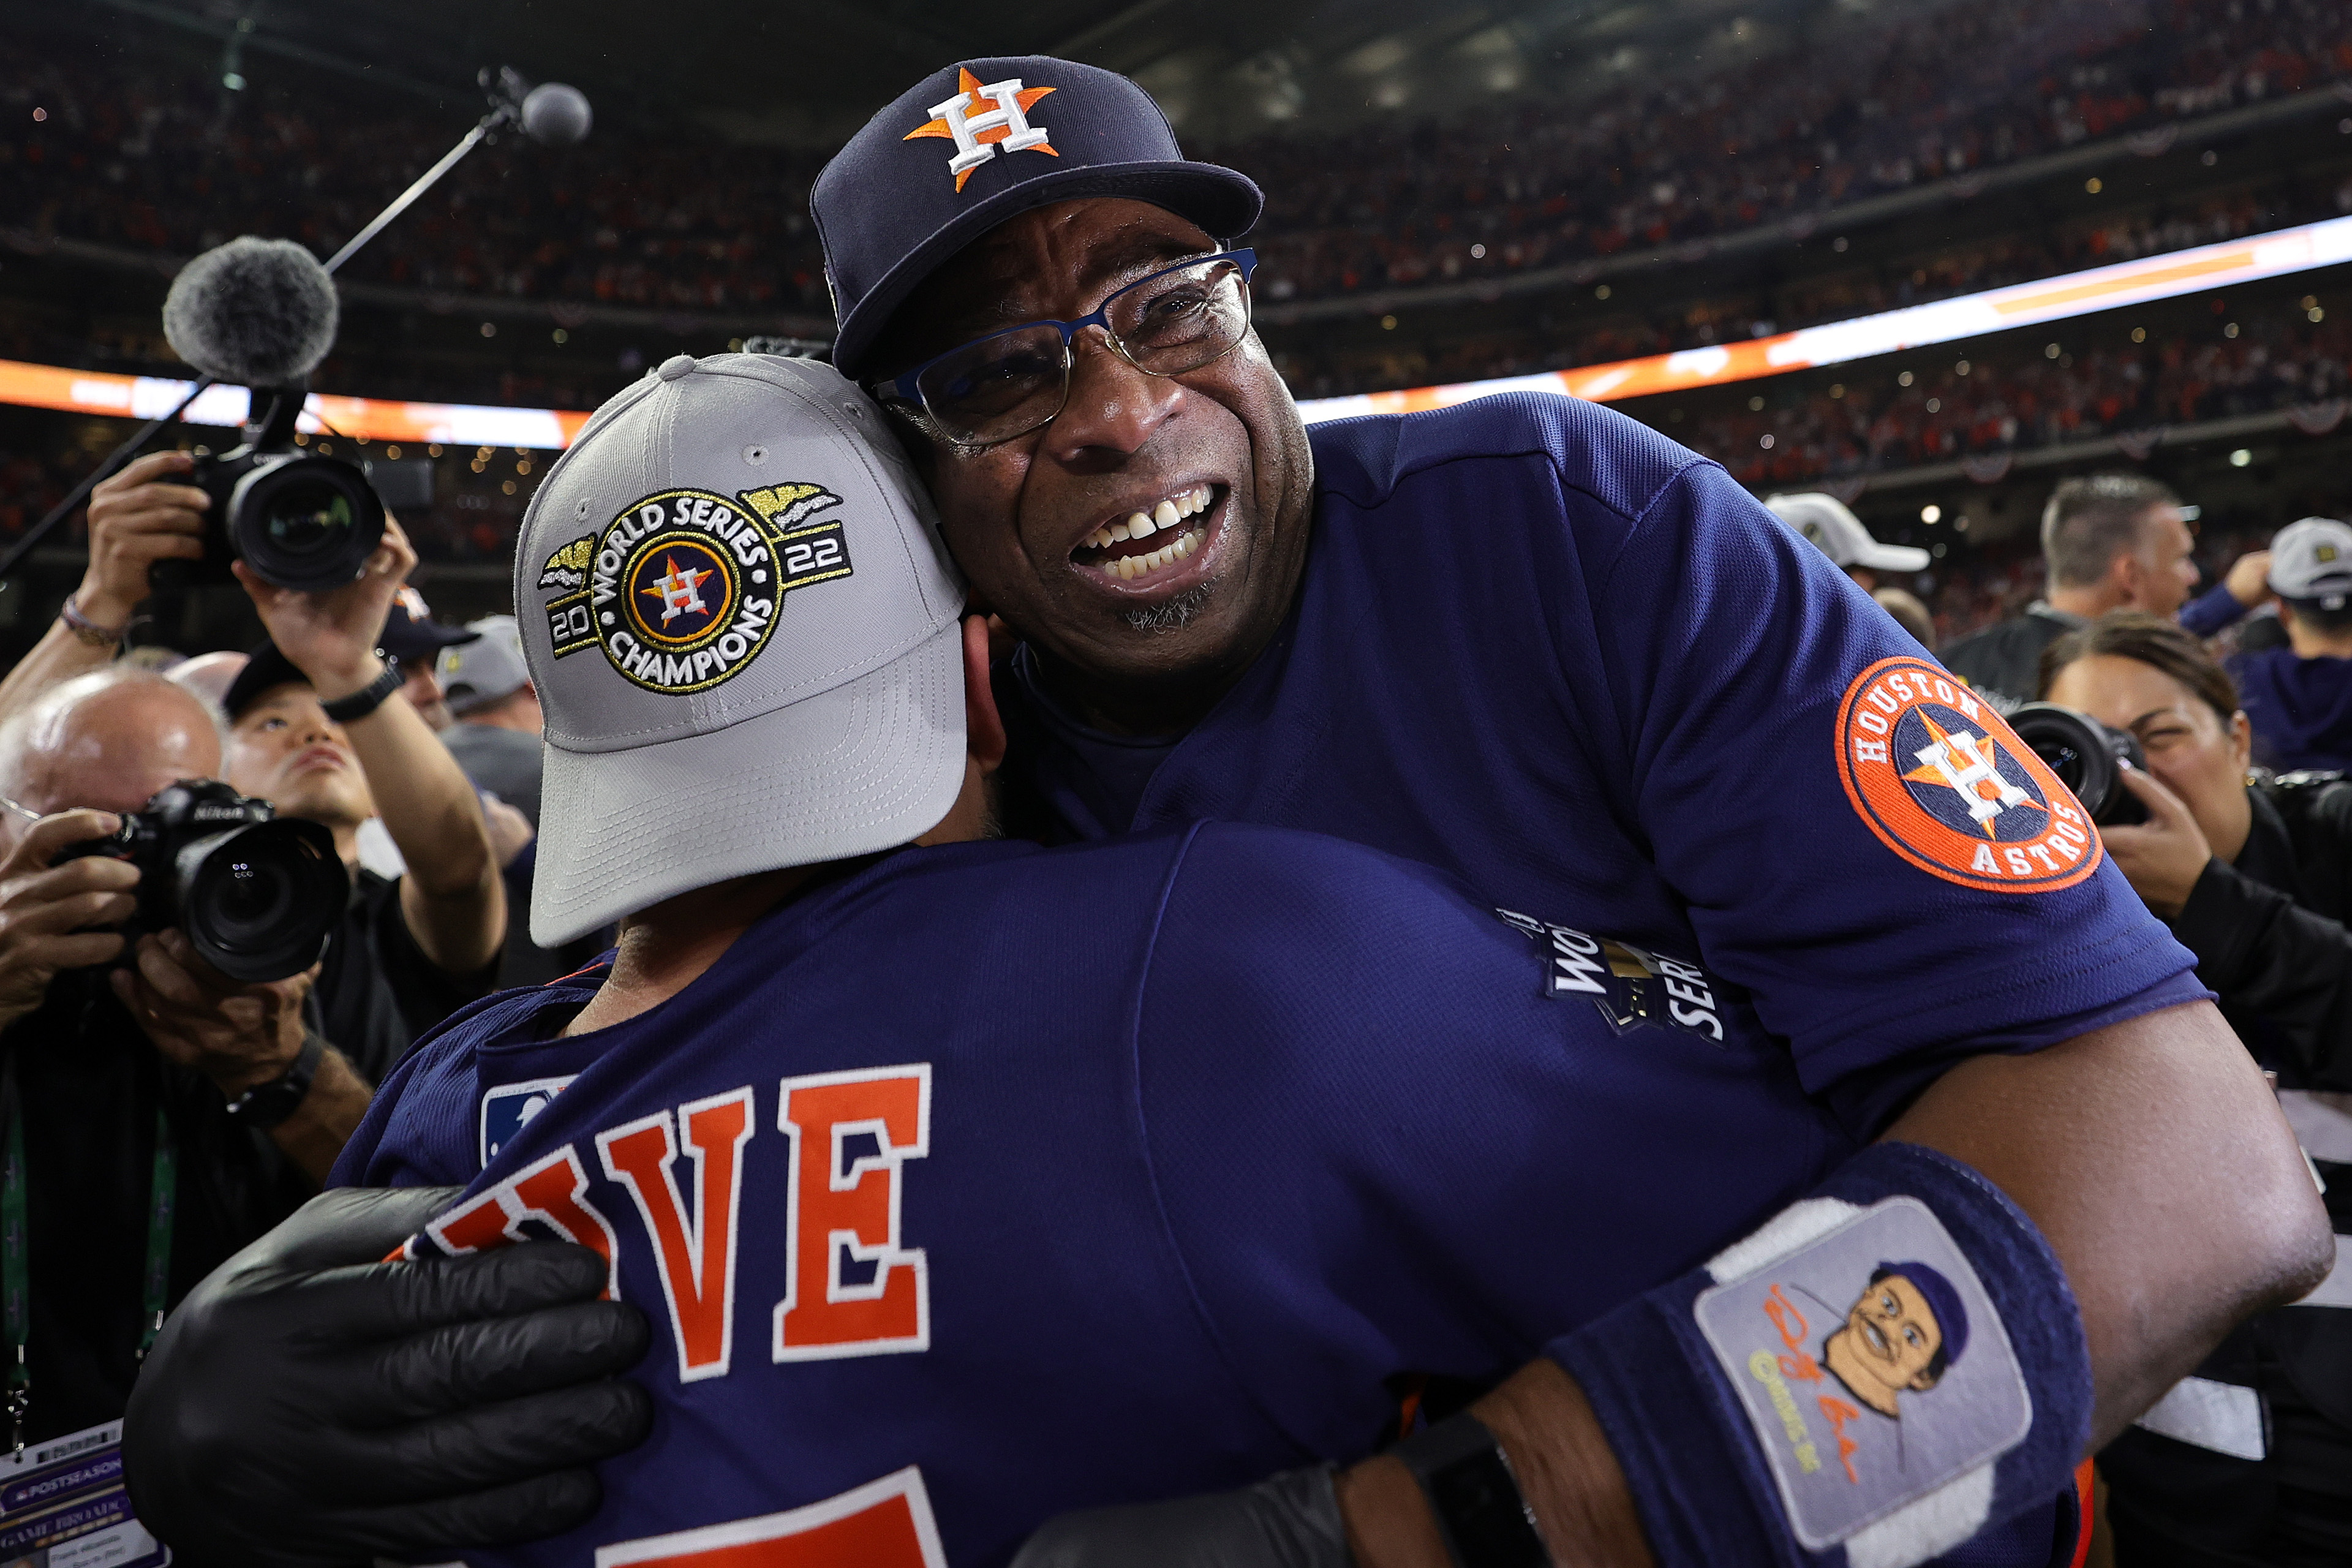 PURE JOY: See the smiles on the field as the Houston Astros celebrate  another World Championship 